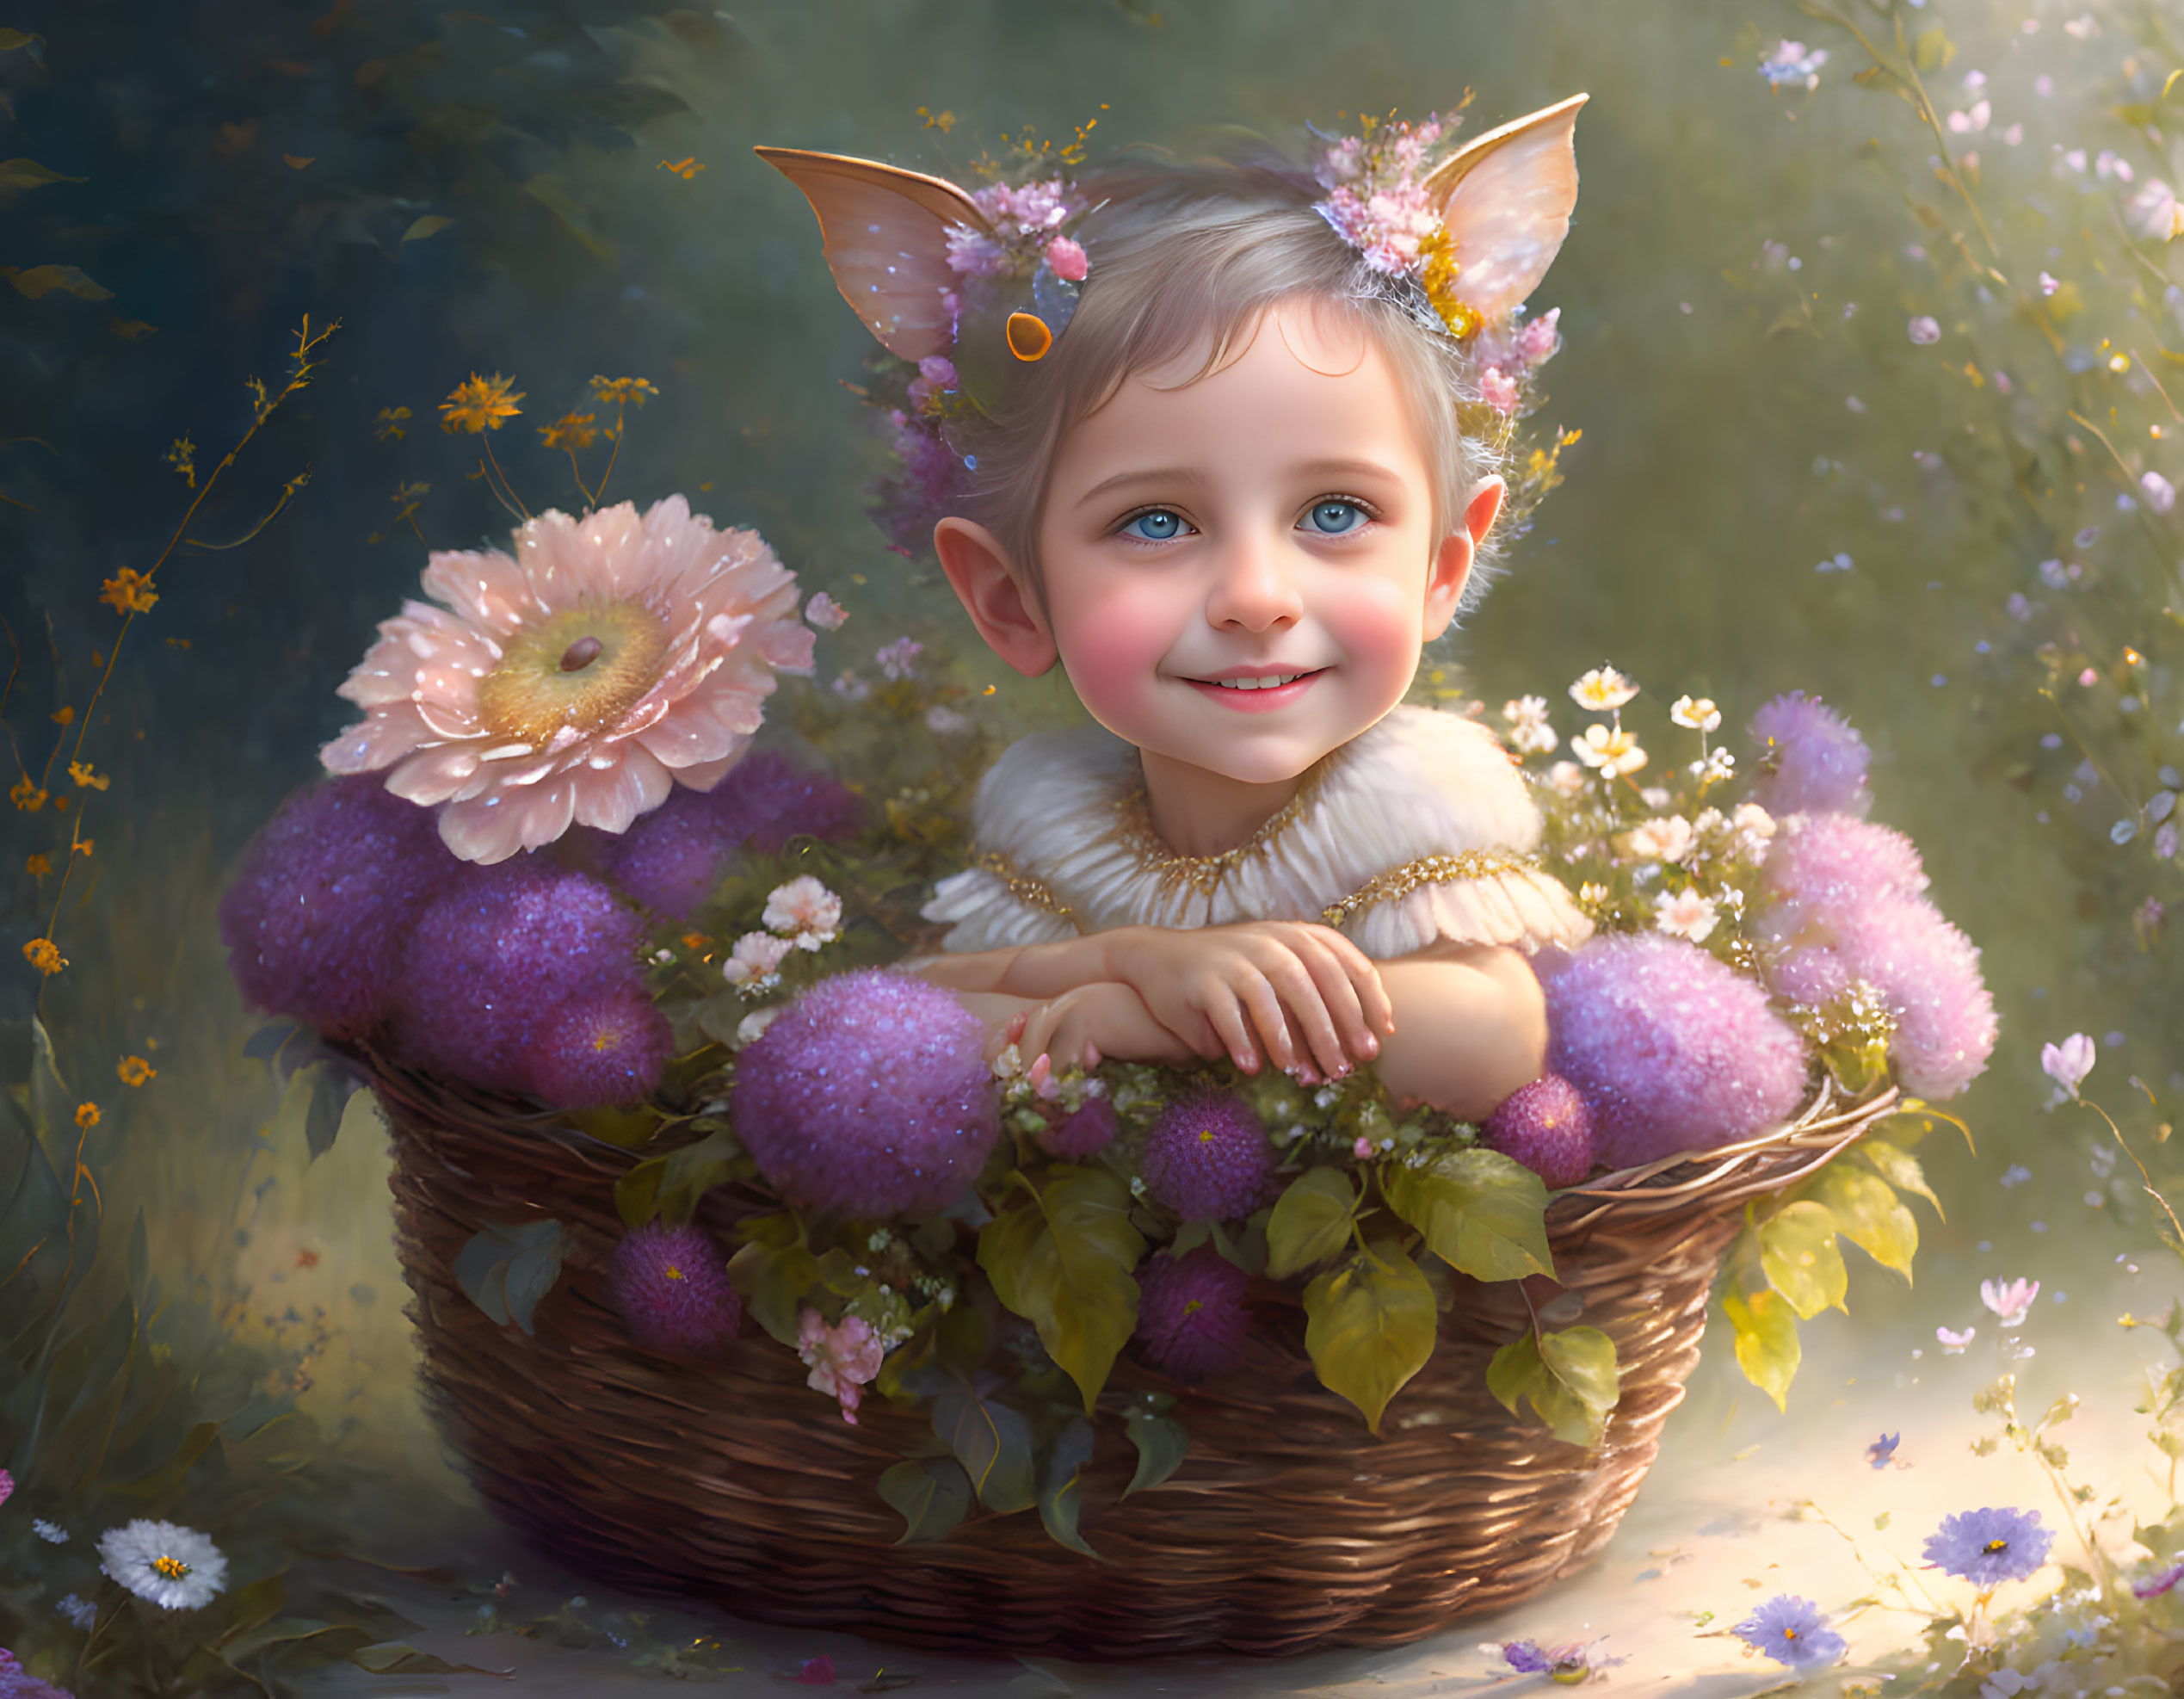 Smiling child with fairy ears in floral crown among purple flowers